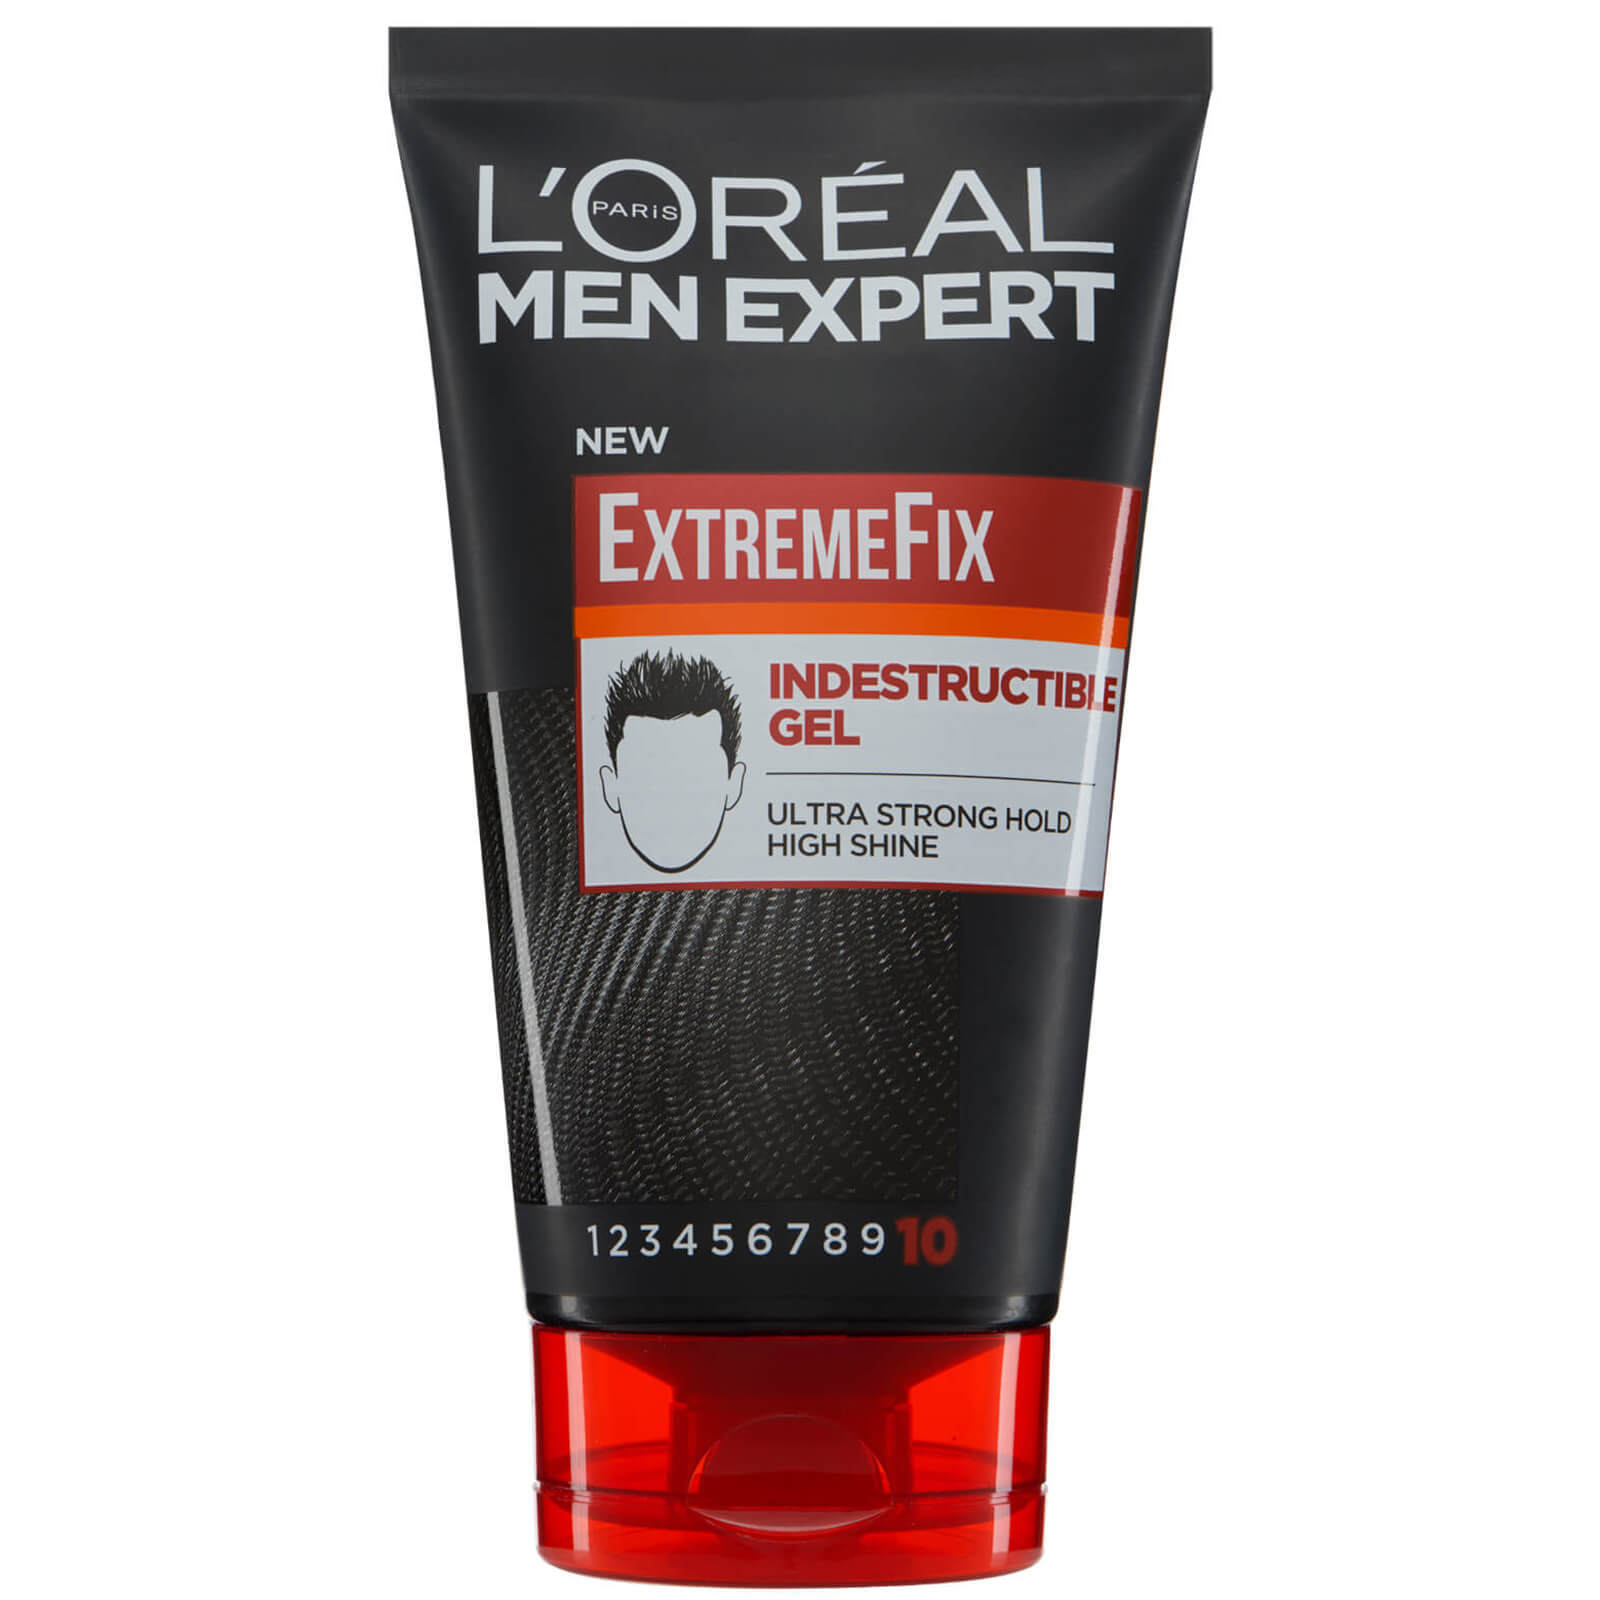 Image of L'Oreal Men Expert Extreme Fix Extreme Hold Invincible Gel 150ml